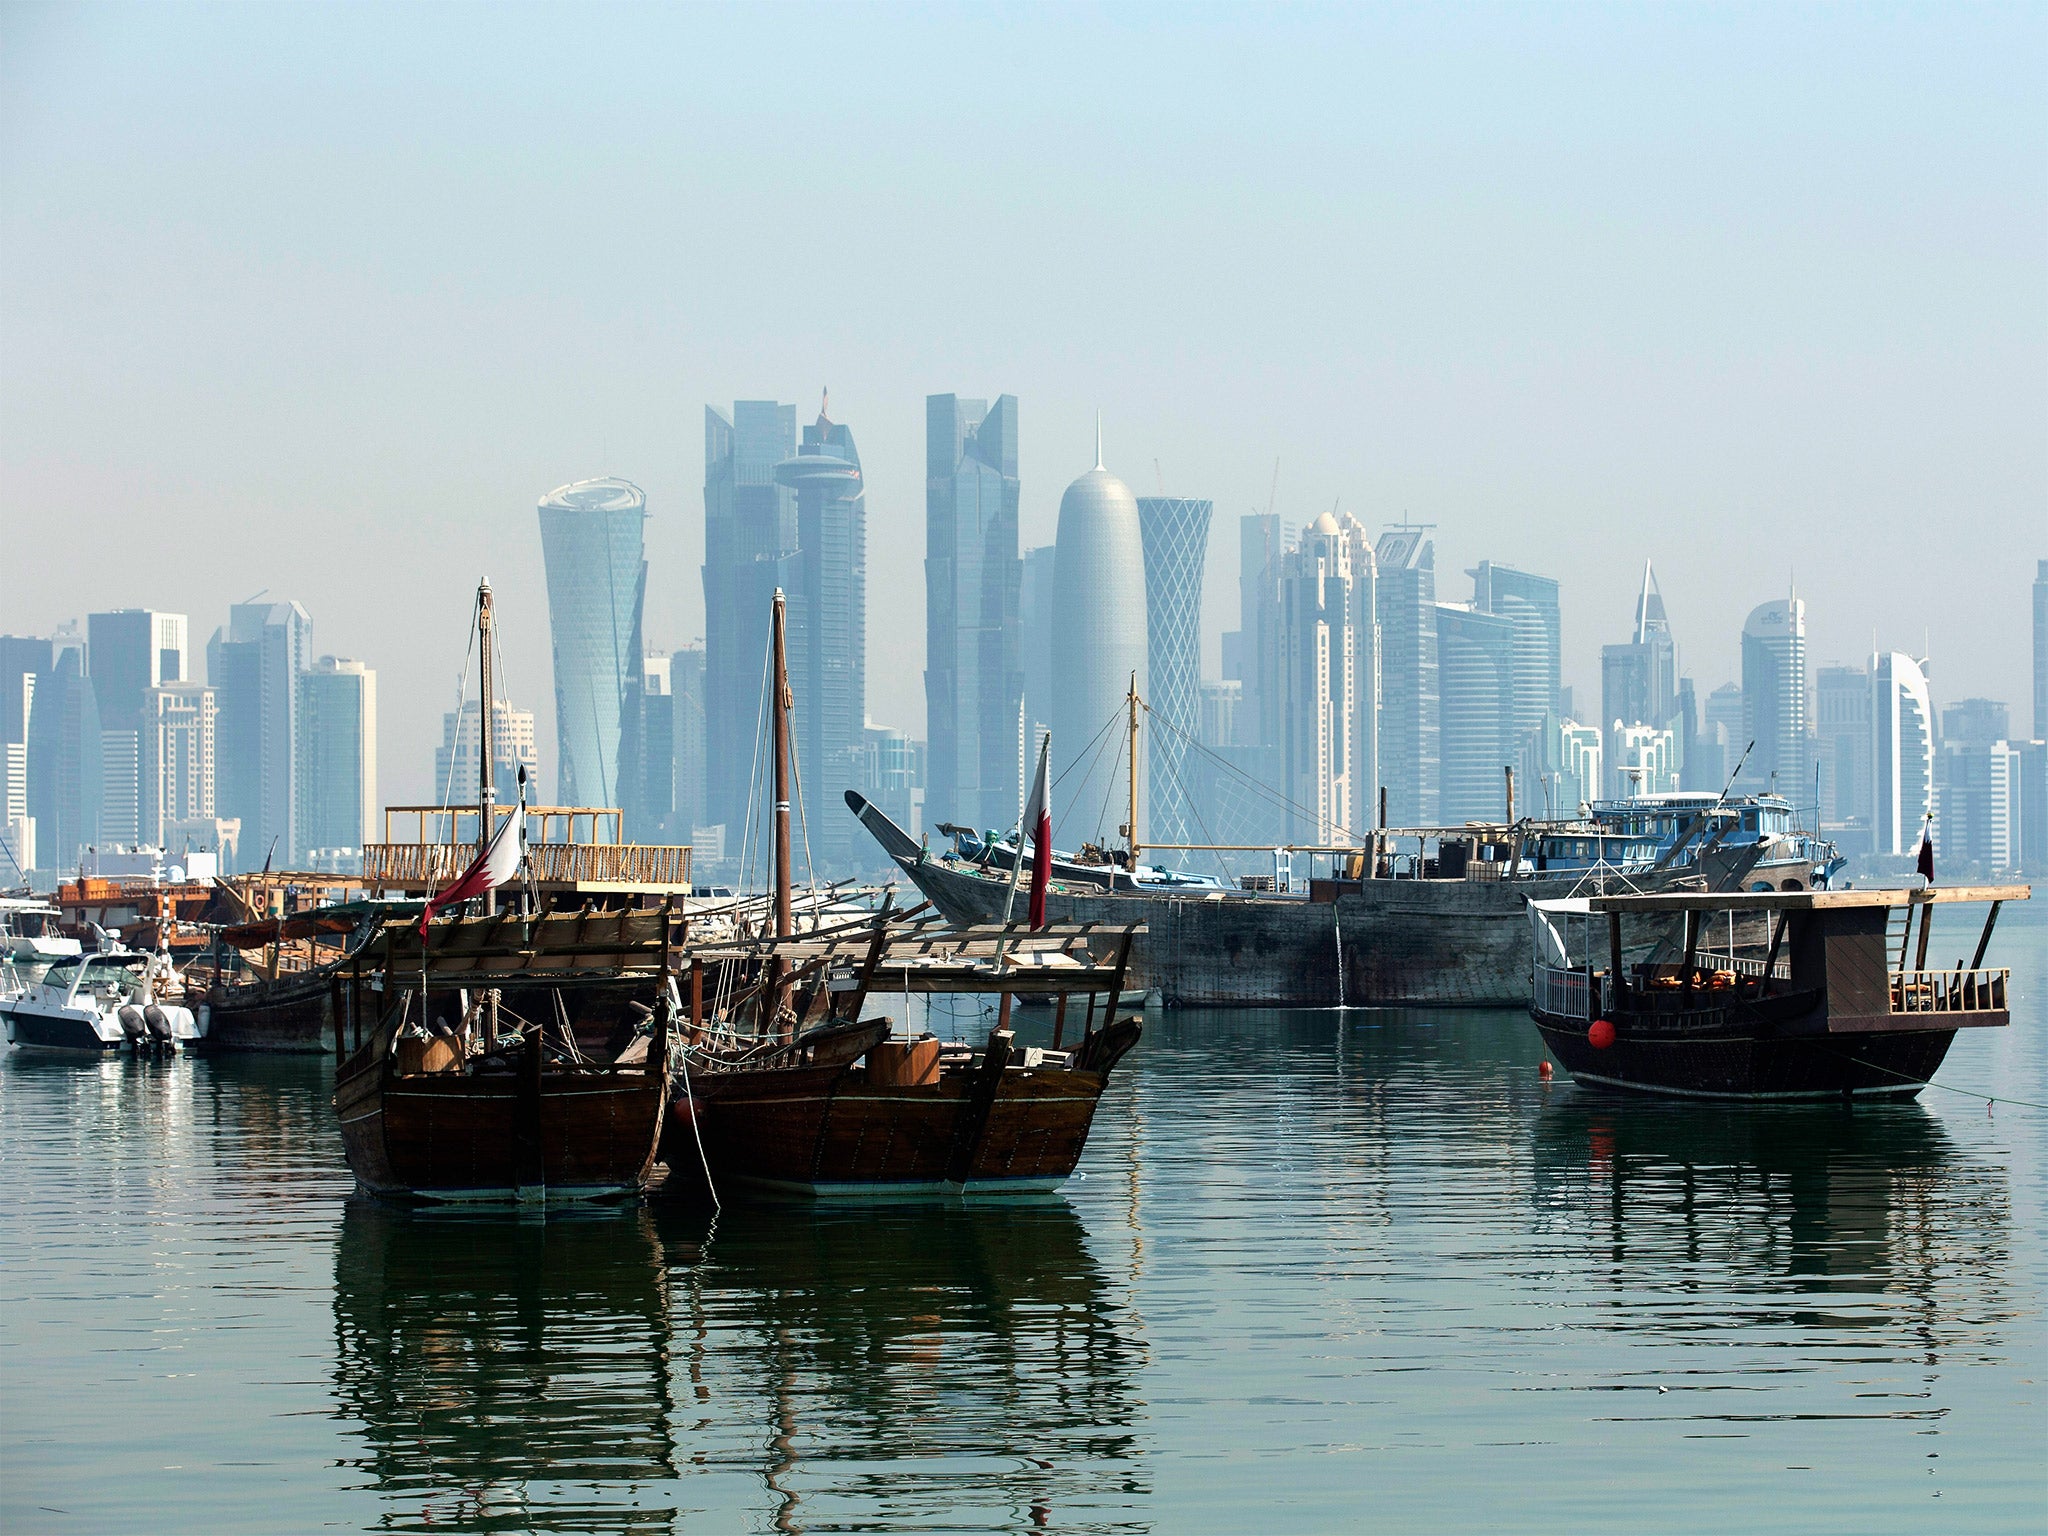 Qatar has come top of the WEF’s report into government efficiencies